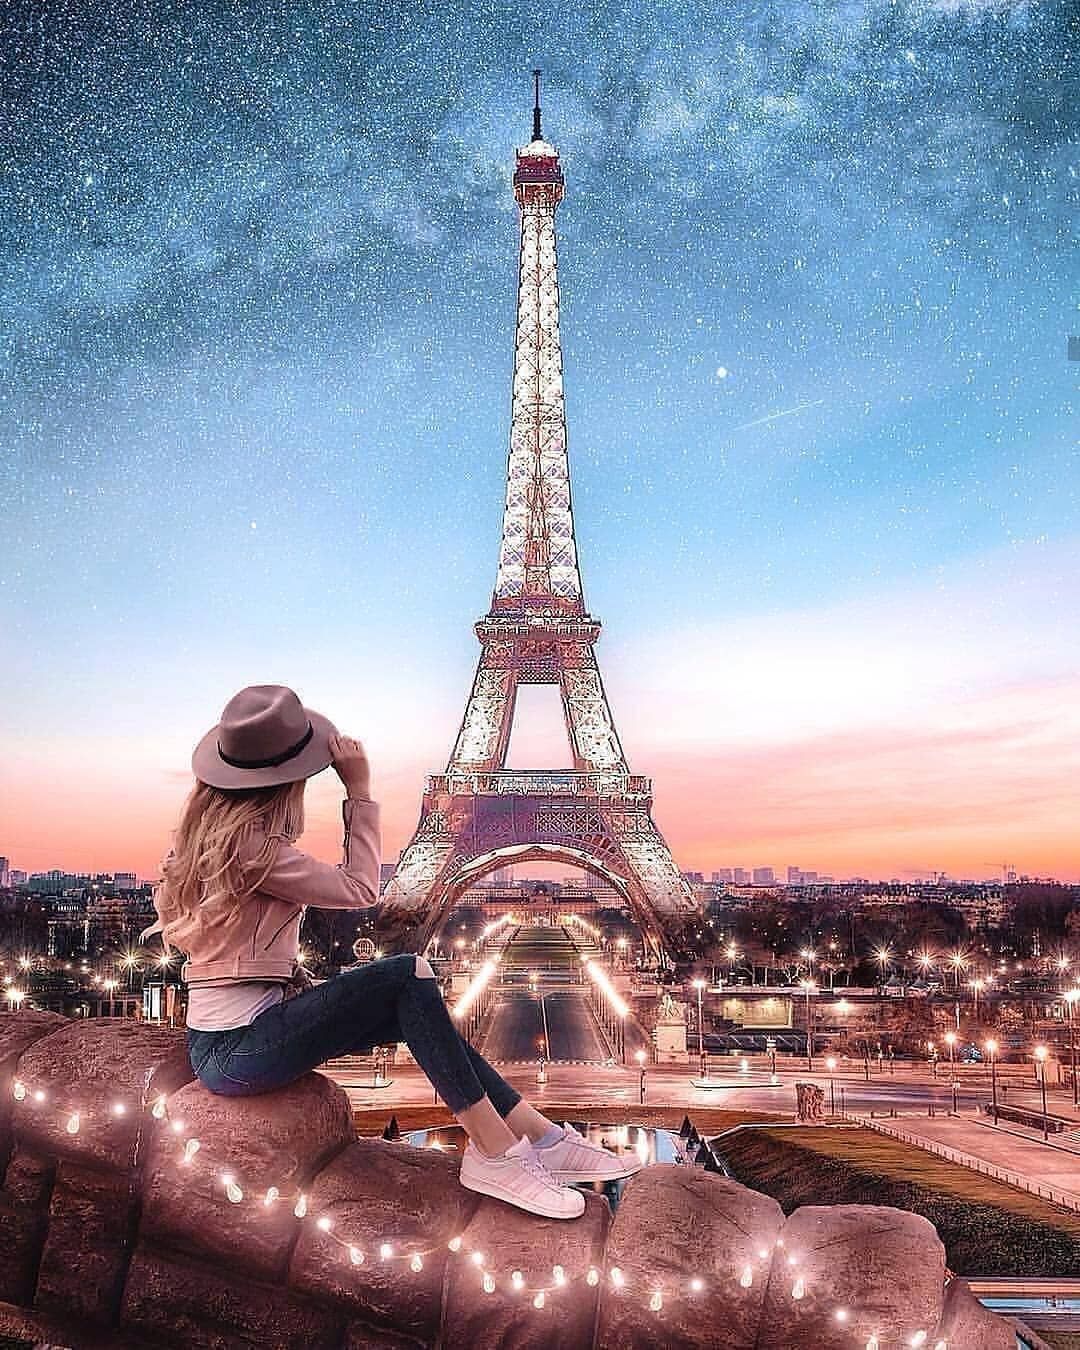 A woman sitting on the edge of something looking at an eiffel tower - Paris